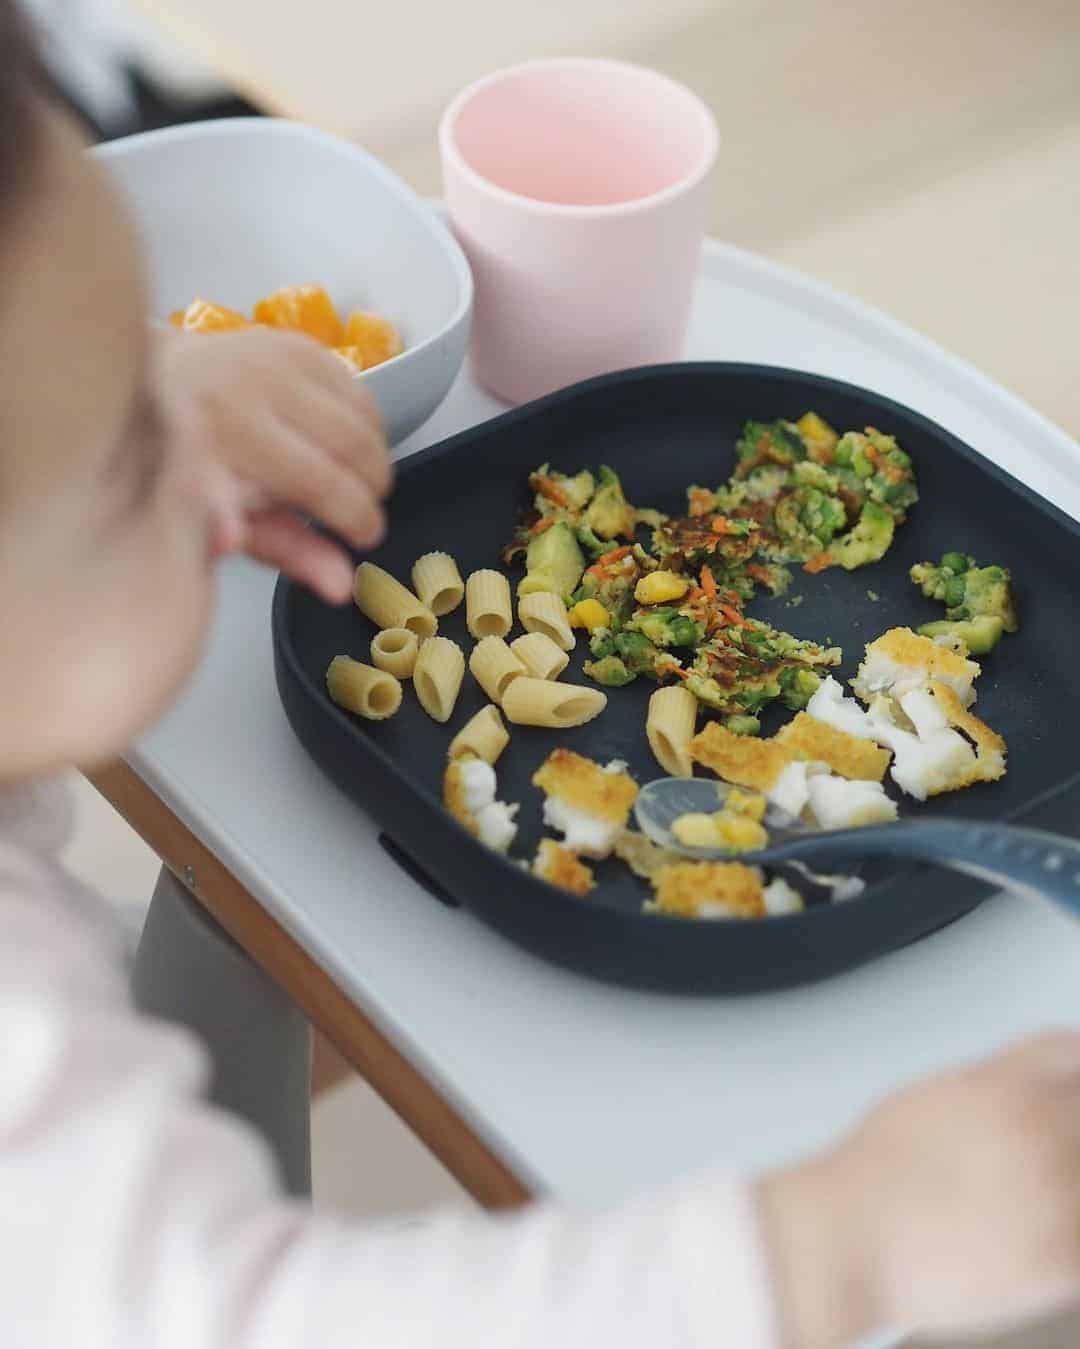 Silicone Suction Meal Set Midnight Toddler Eating From Plate